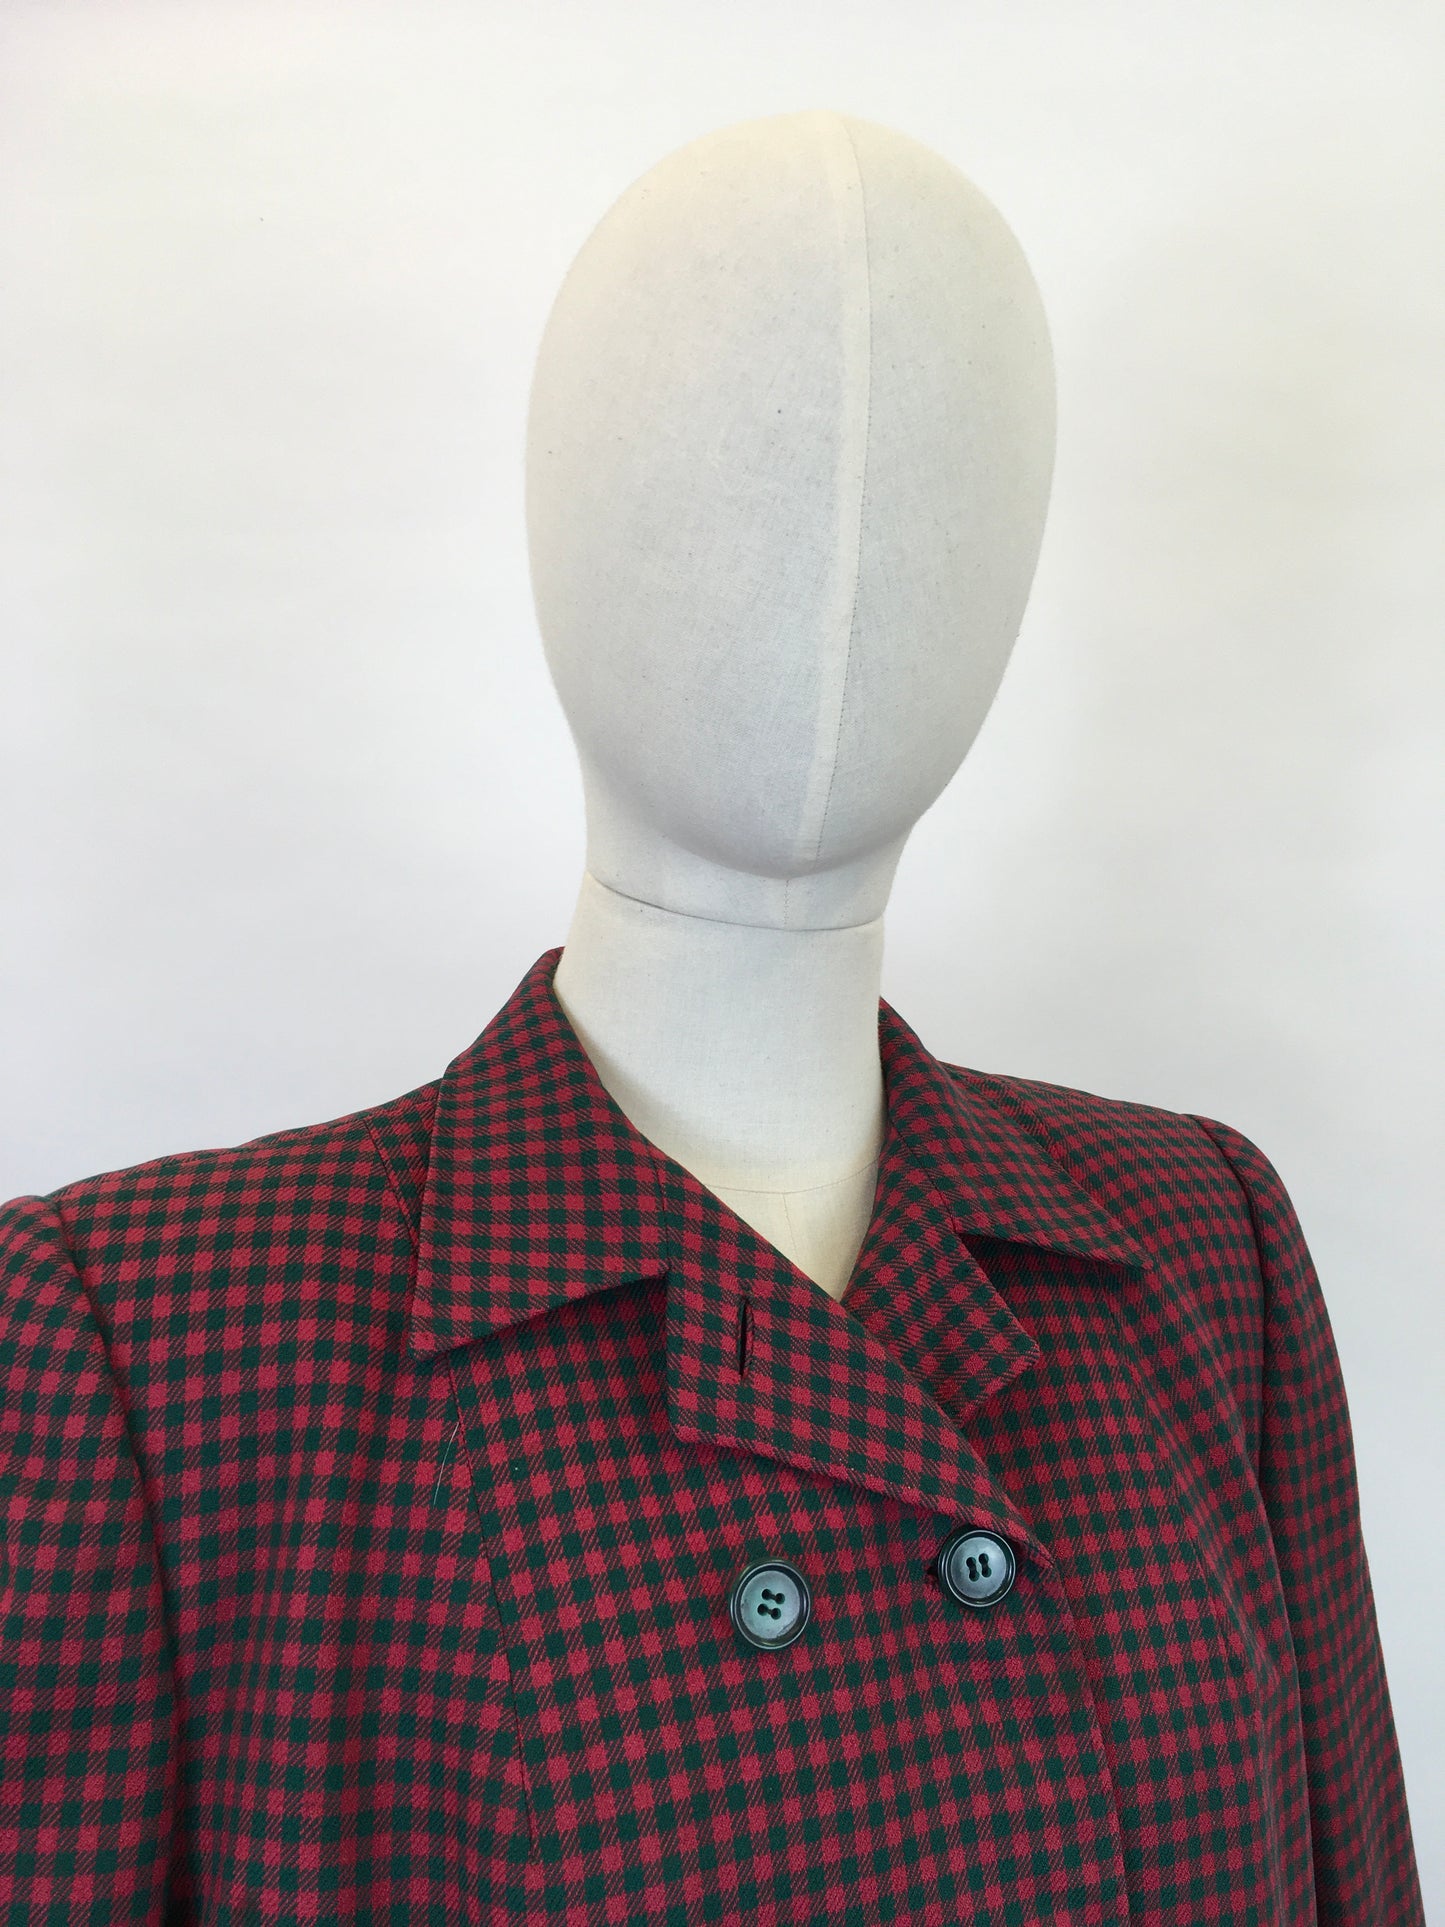 Original 1940’s American Double Breasted Jacket - In A Lovely Red & Green Check Suiting Cloth